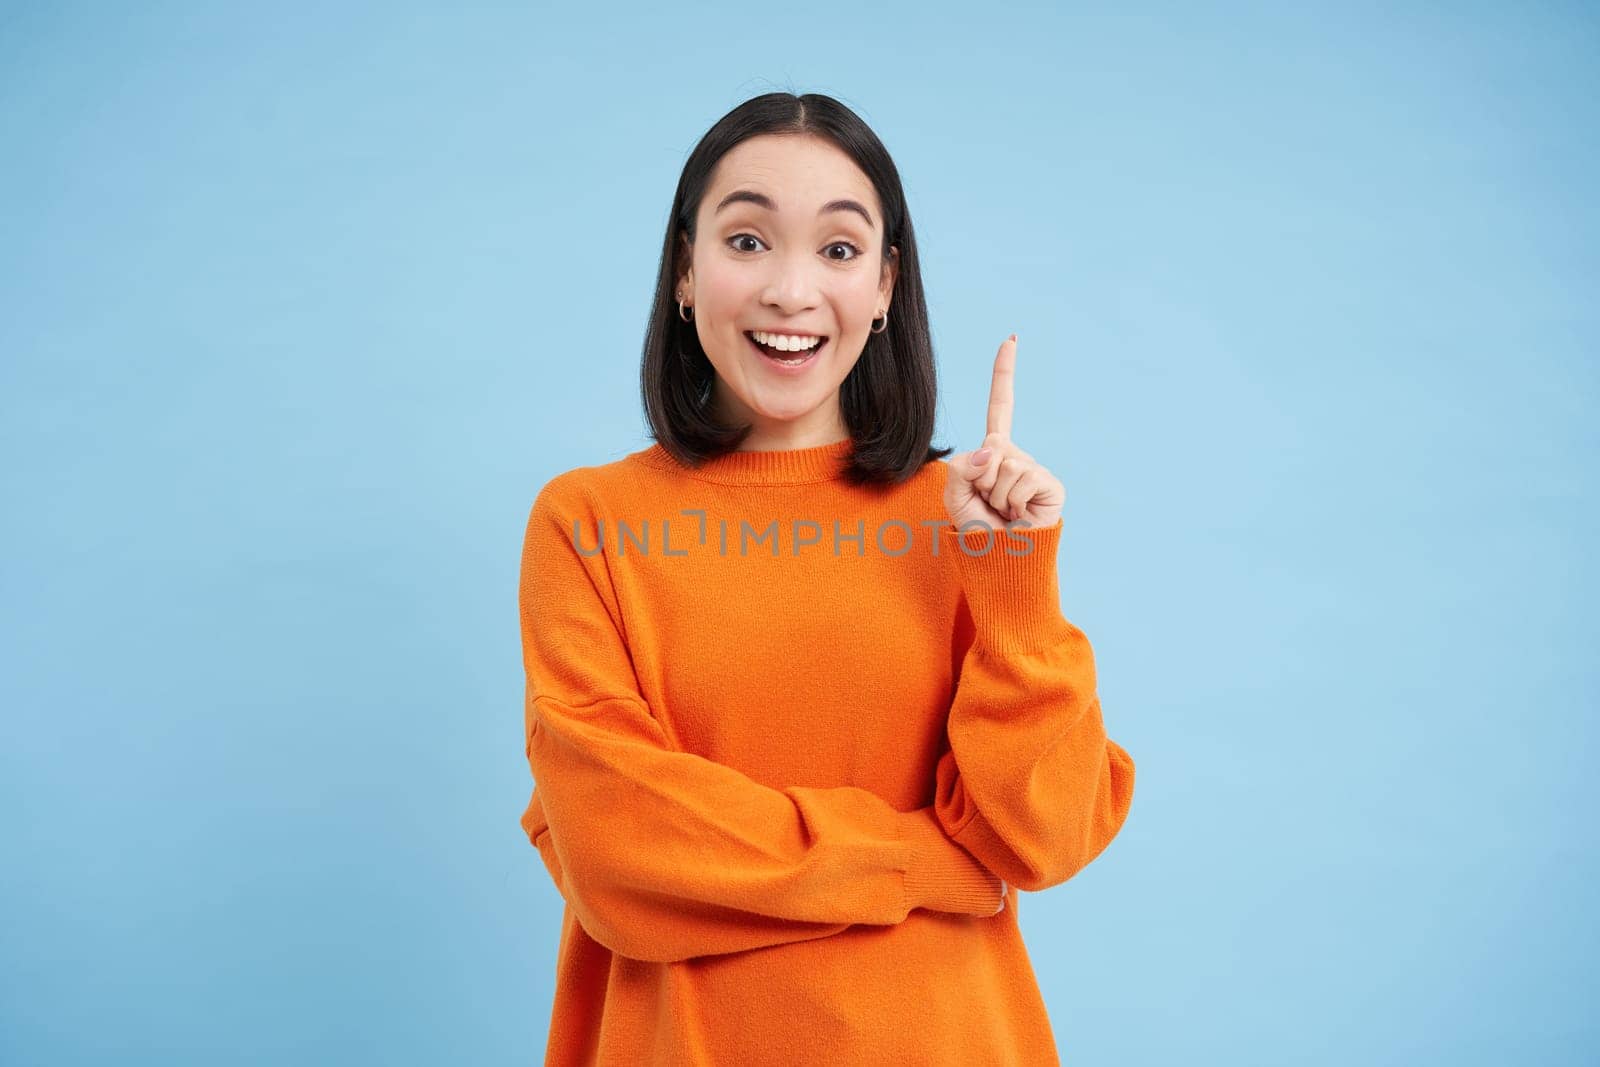 She has perfect plan. Amazed korean woman shows one finger, eureka gesture, has an idea, suggest something, say her thoughts, stands over blue background.